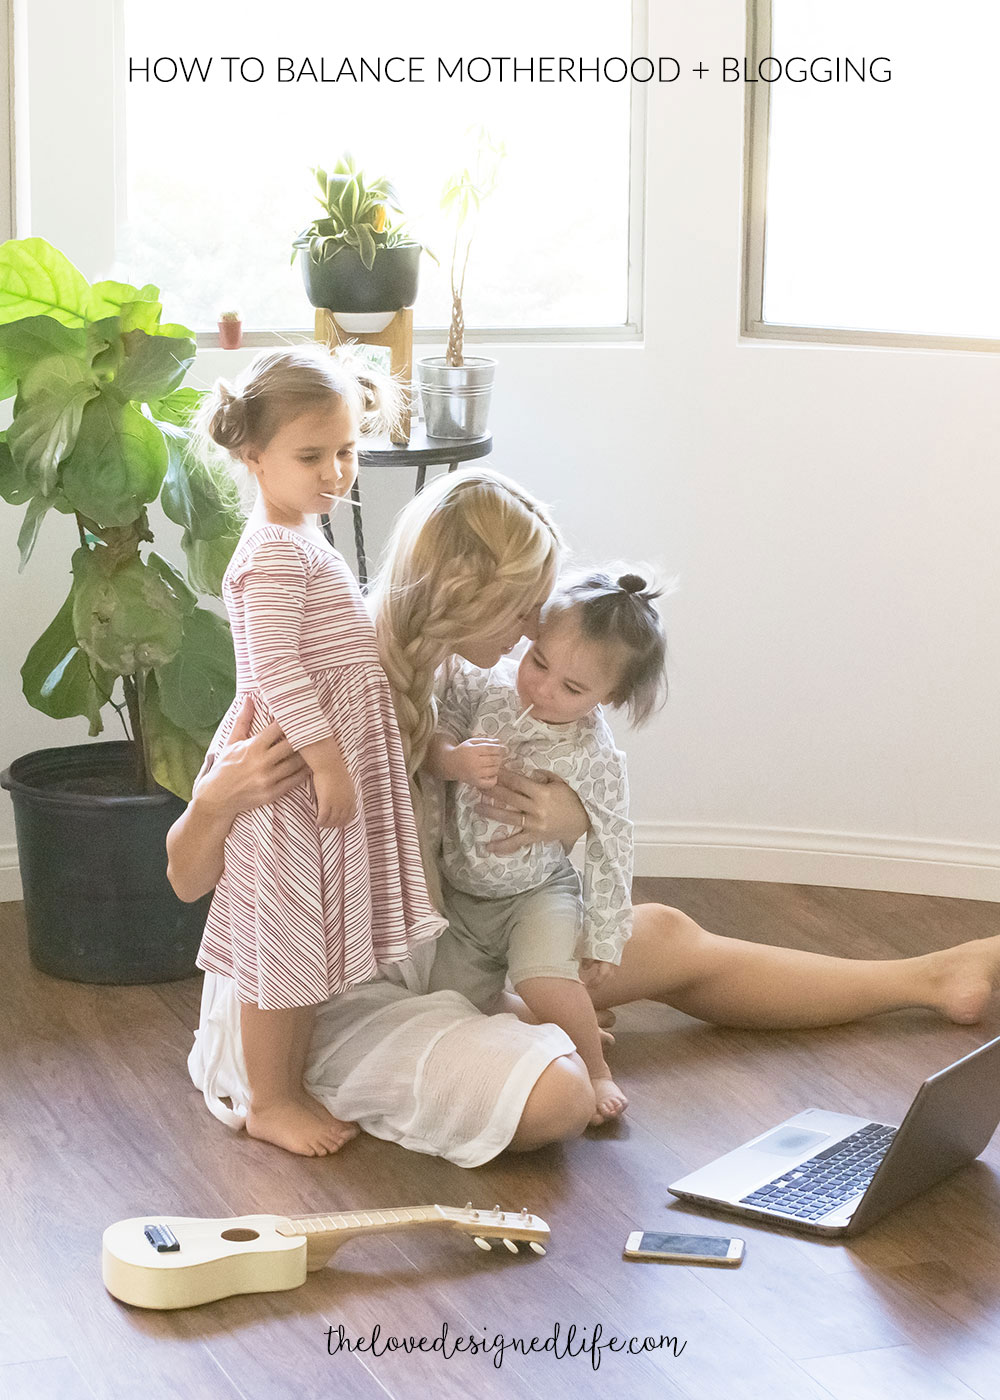 how to balance motherhood and blogging | the mom blog collective | thelovedesignedlife.com